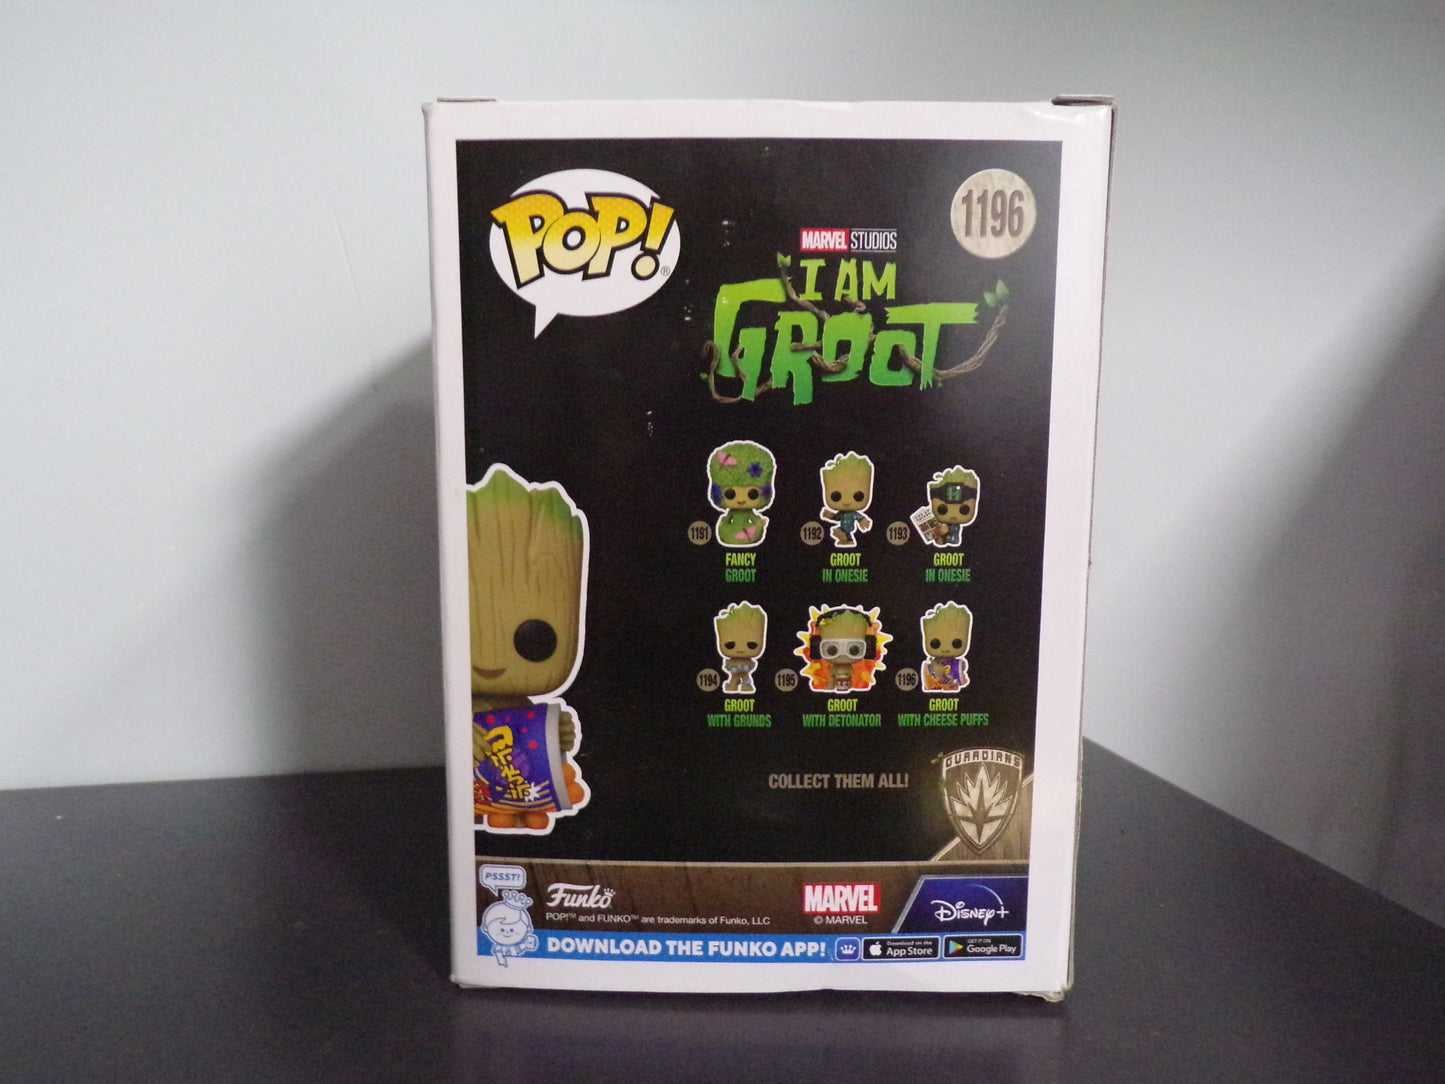 Funko! Pop I Am Groot - Groot with Cheese Puffs #1196